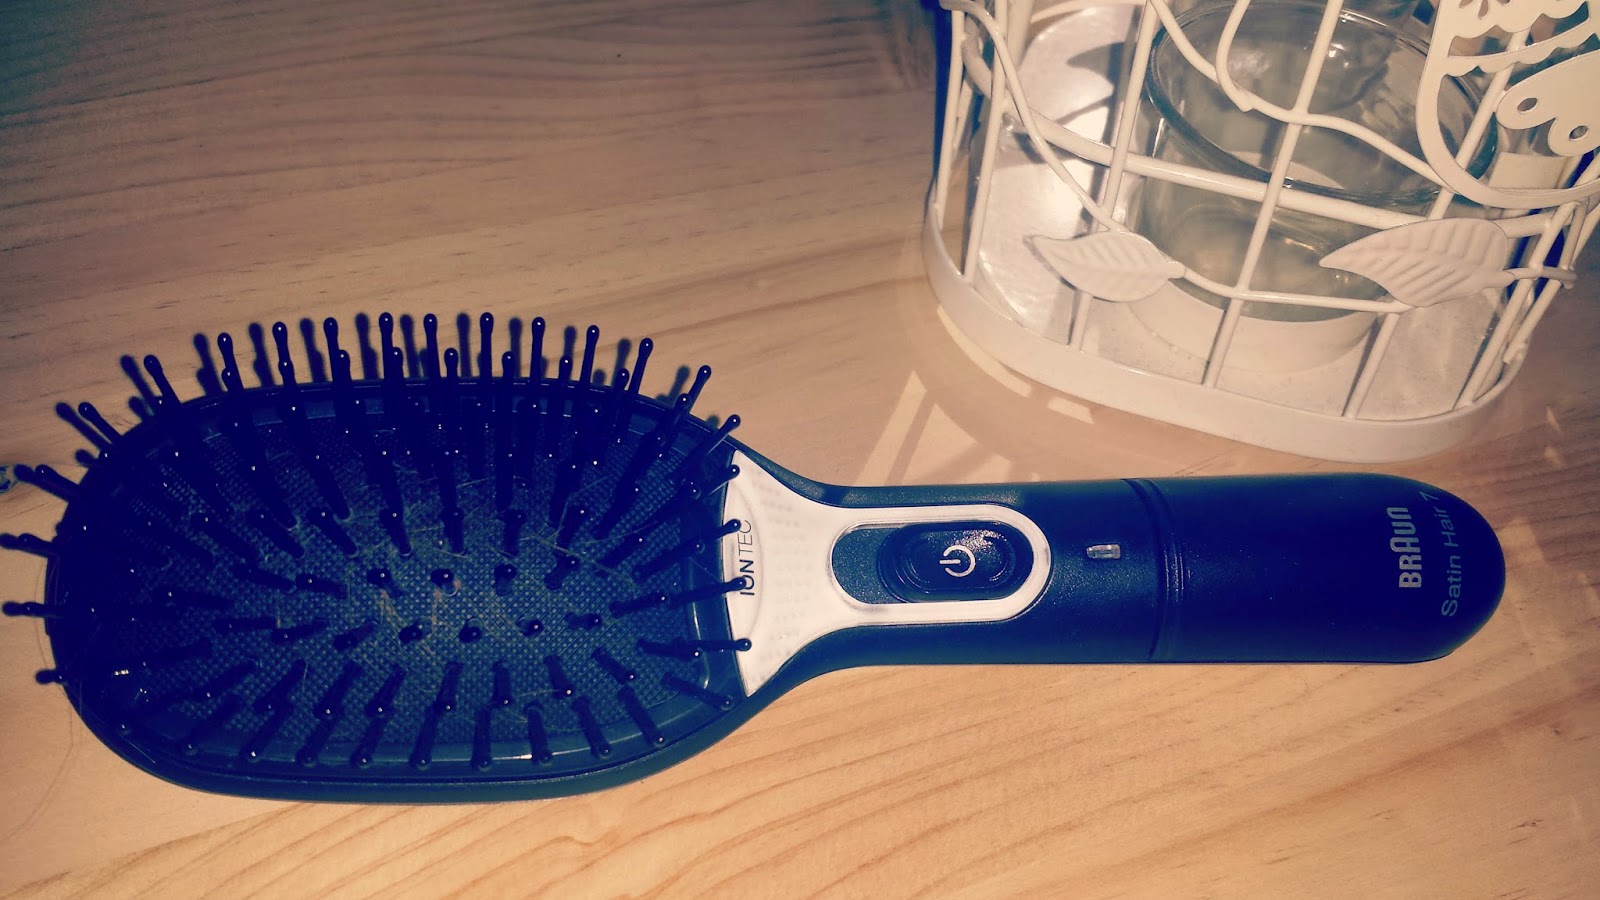 groep Email Rally Braun Satin Hair 7 Iontec Brush Review - MUMMY TO THE MAX